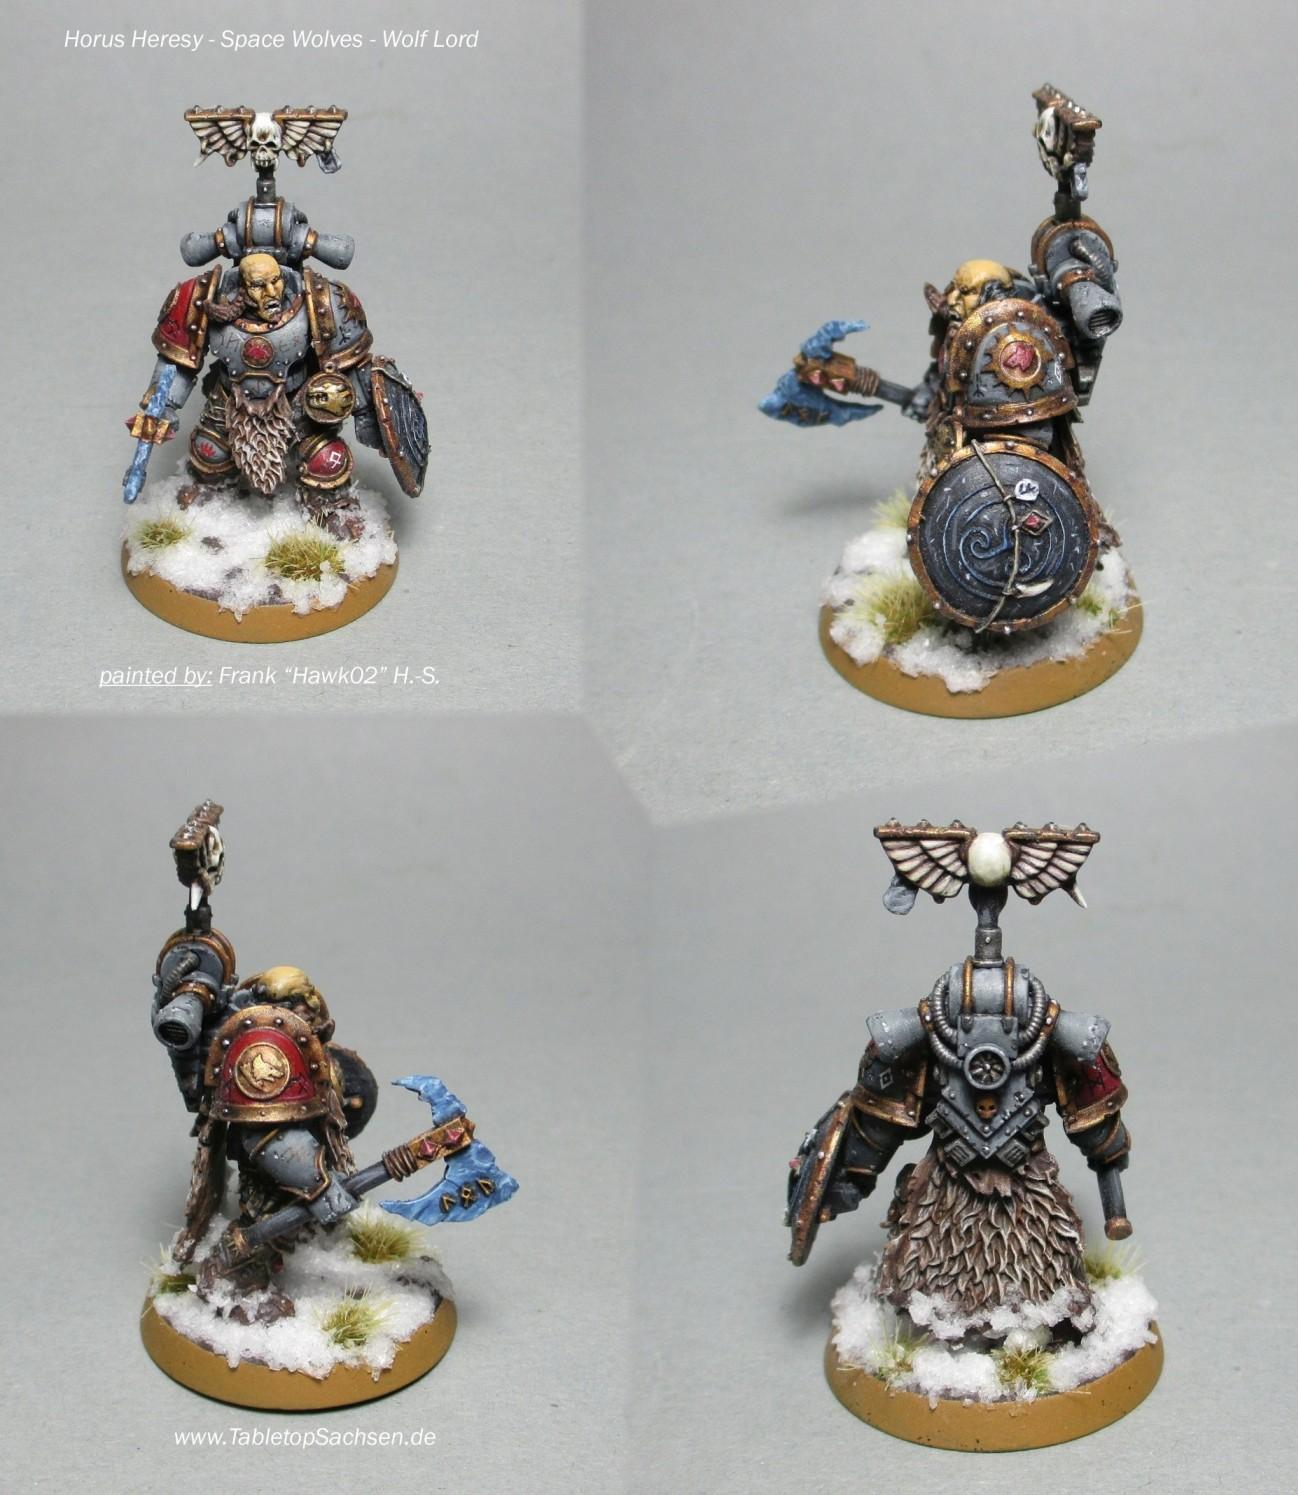 wh30k_space_wolves_wolf_lord_henriksson.jpg.23747dc45ce3ce5b296f817f966c7be9.jpg